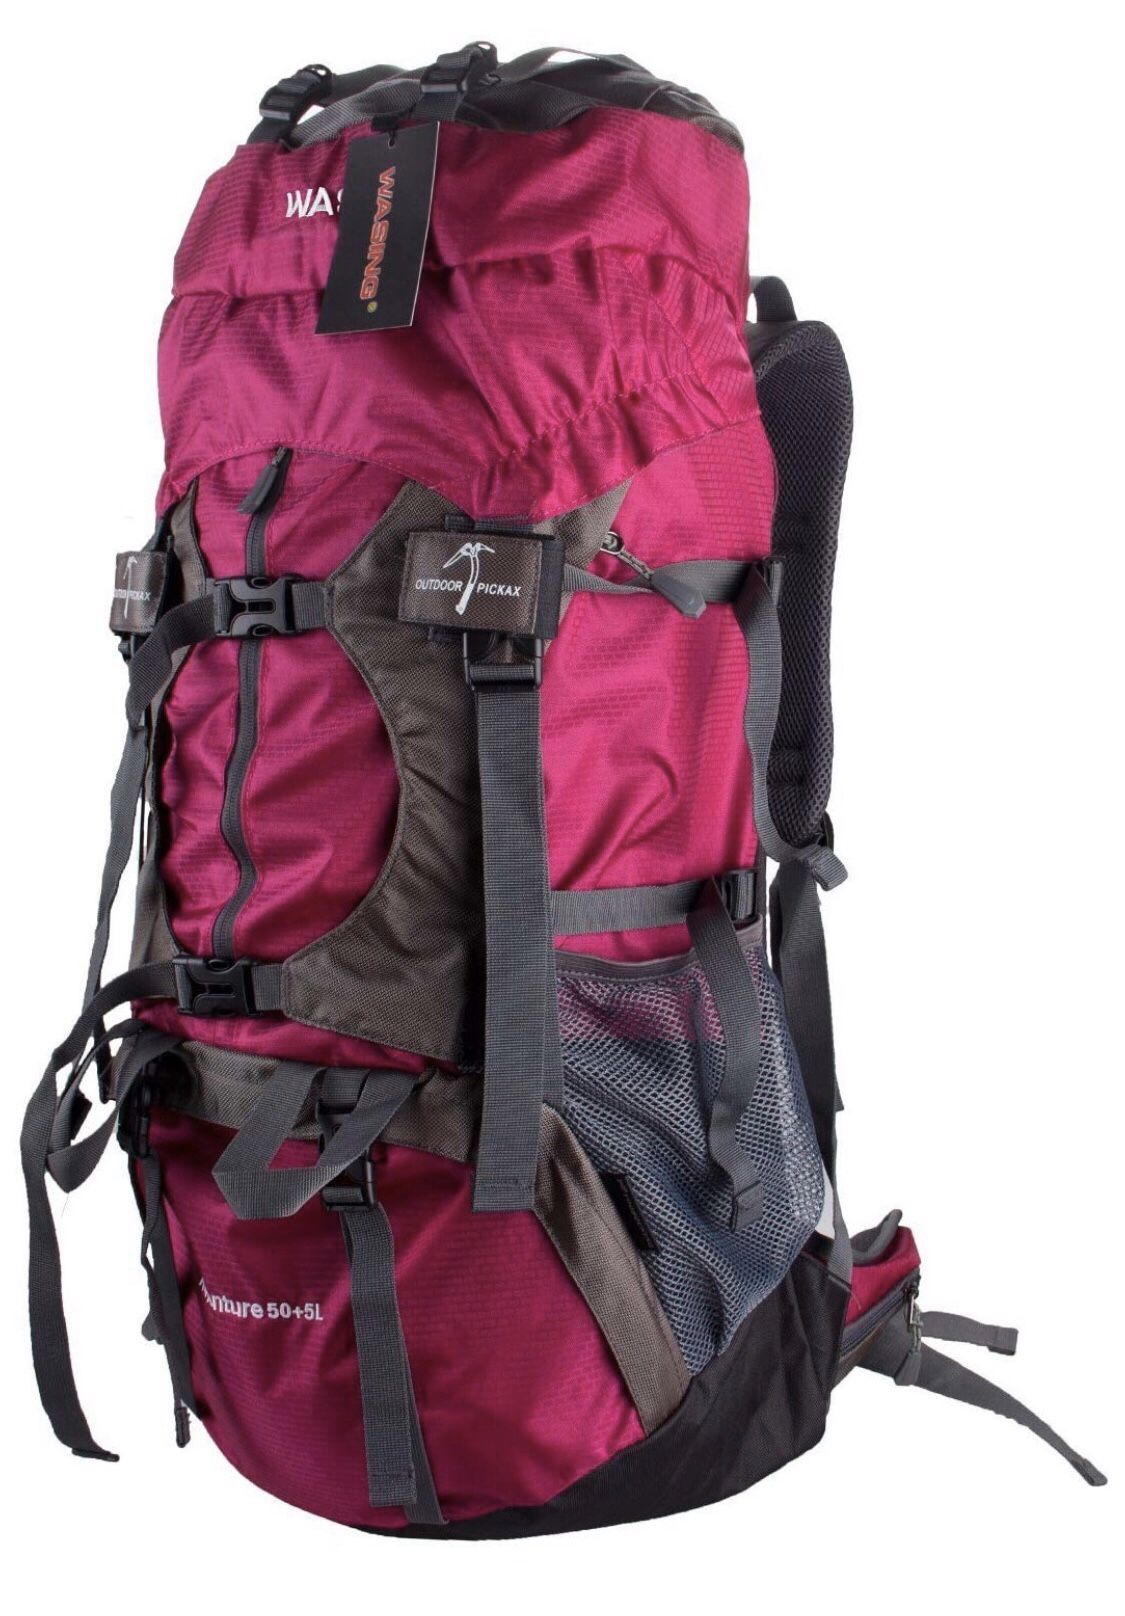 *NEW* 55L Internal Frame, Hiking, Travel, Climbing, Camping Backpack with Rain Cover, Fuchsia